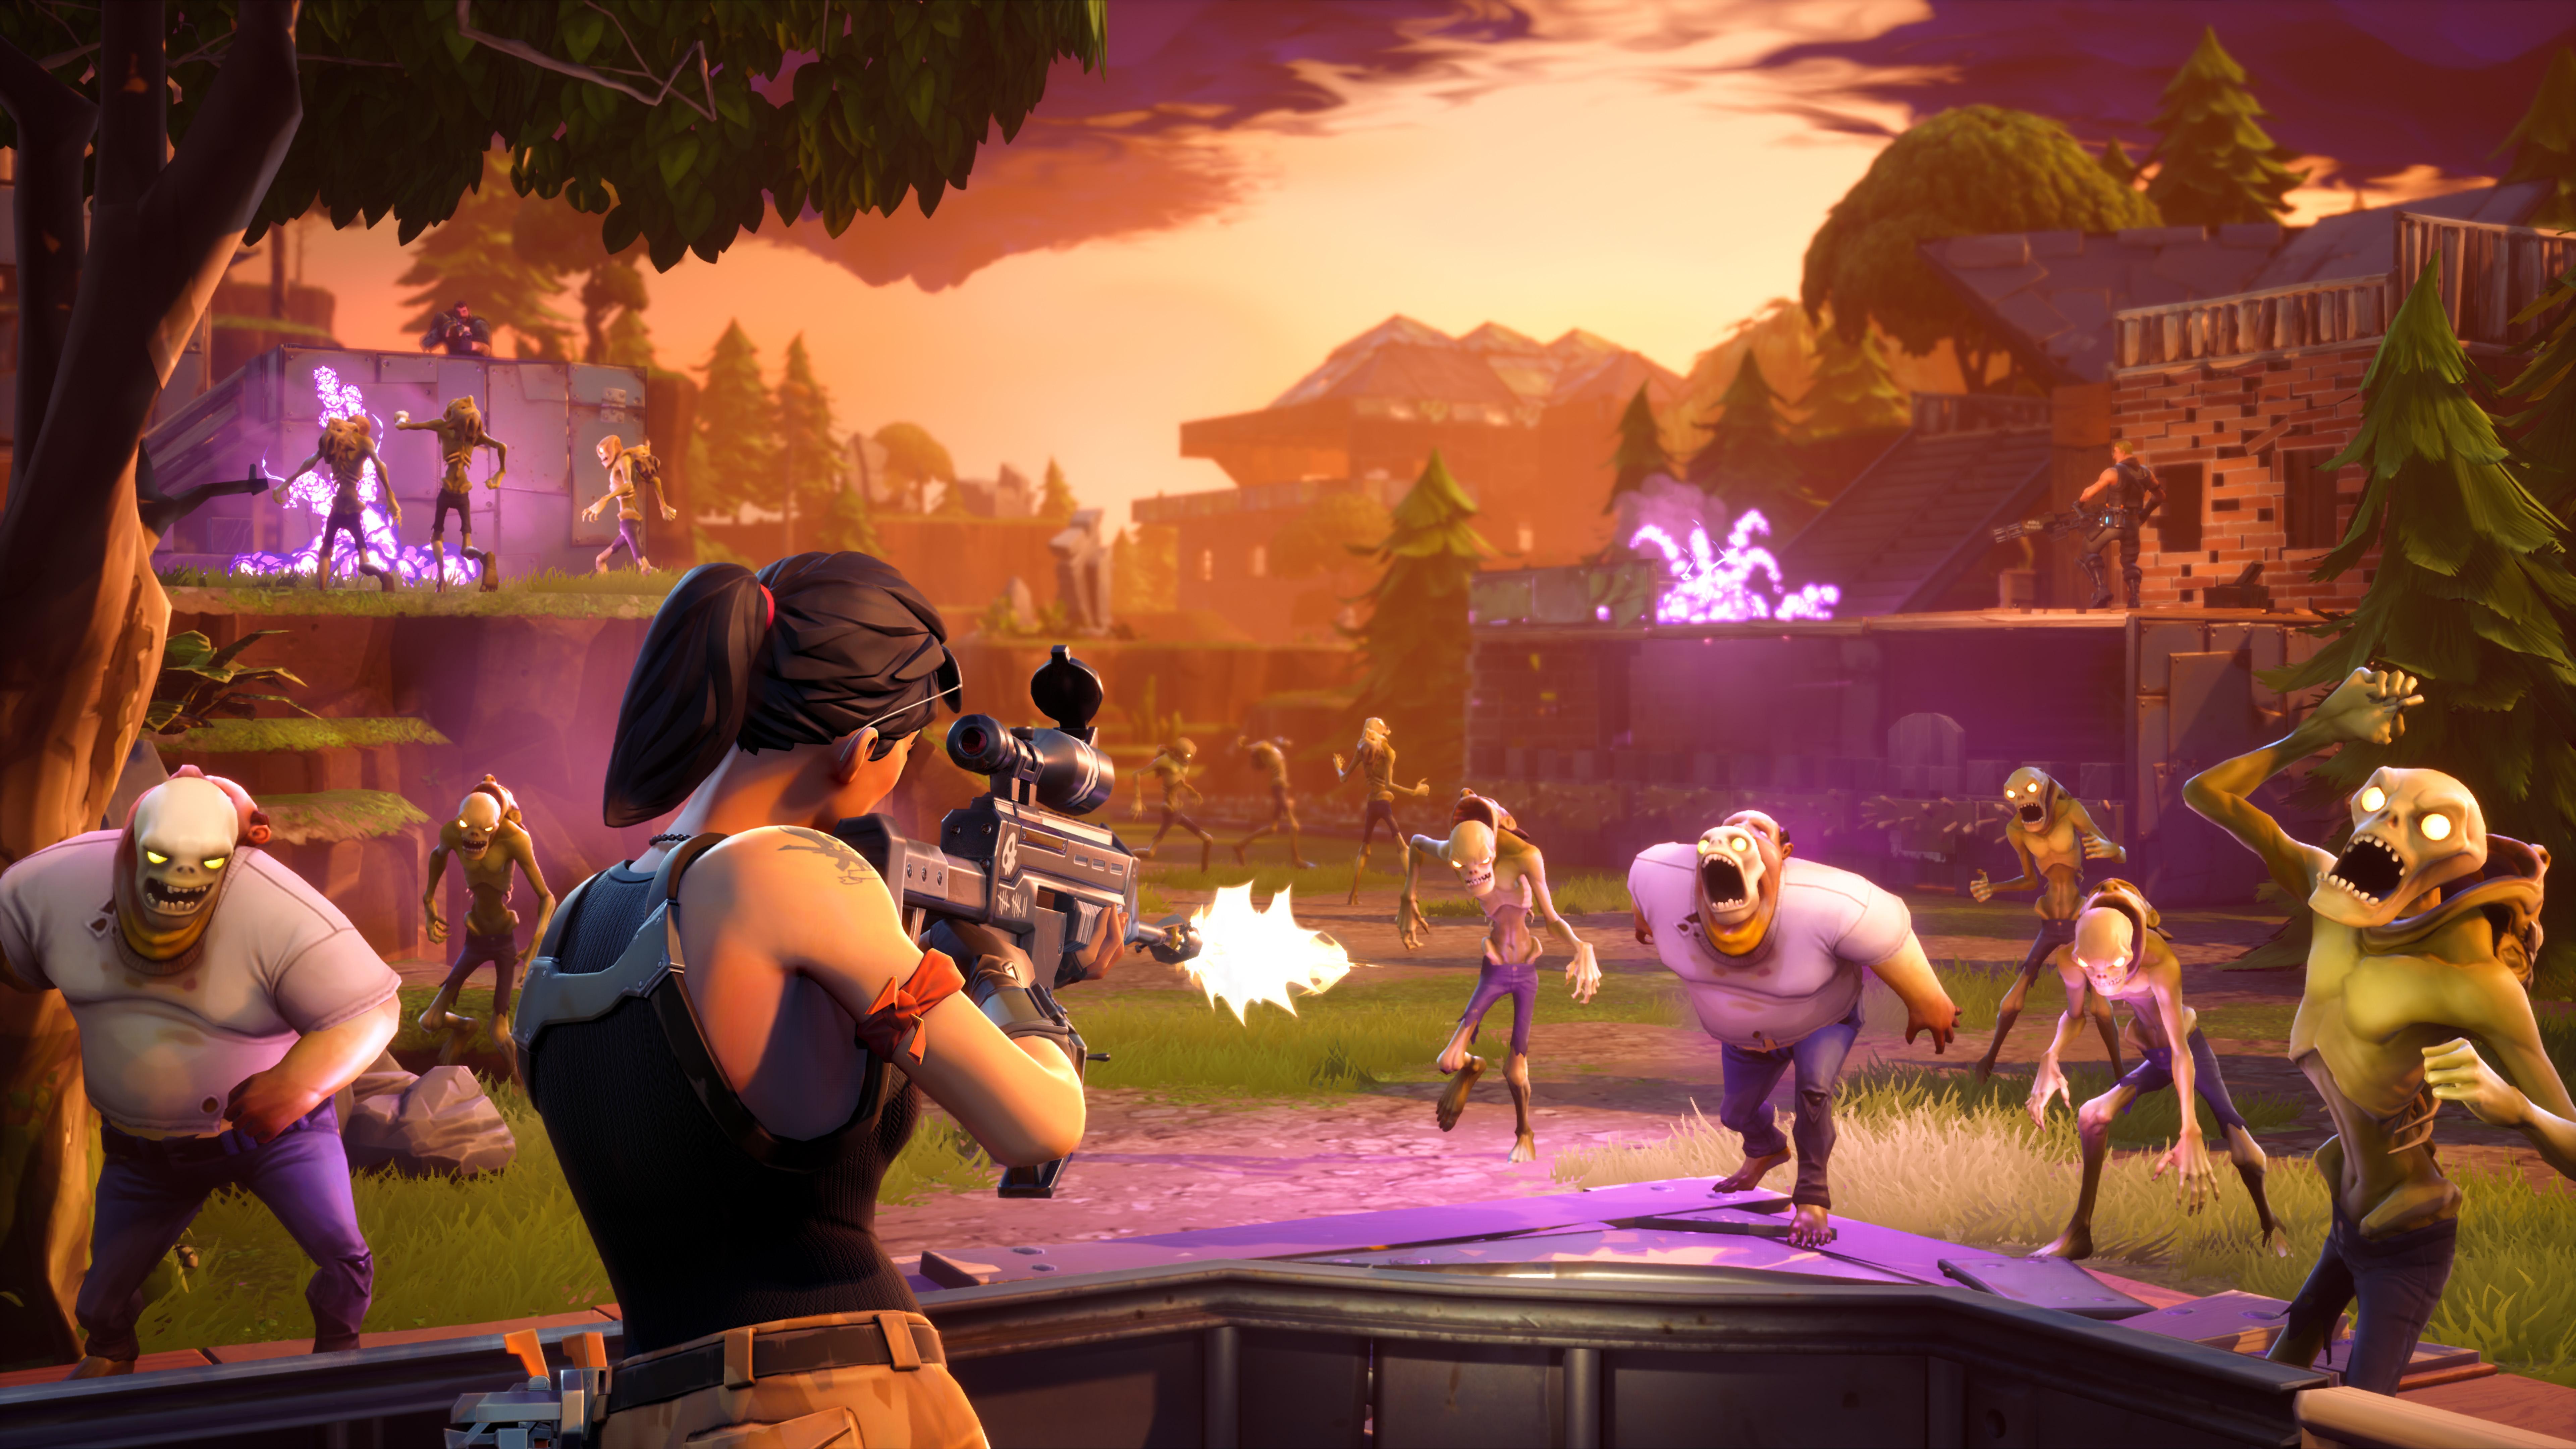 Enlarge / At Its Best, Fortnite Looks (and Feels) Like This Nicely Staged Promo Pic Of In Game Action. However, So Many Free To Play Annoyances Drag This. Poisons A Potentially Great Game With Agonizing F2P Limits. Monsters Fortnite Wallpaper